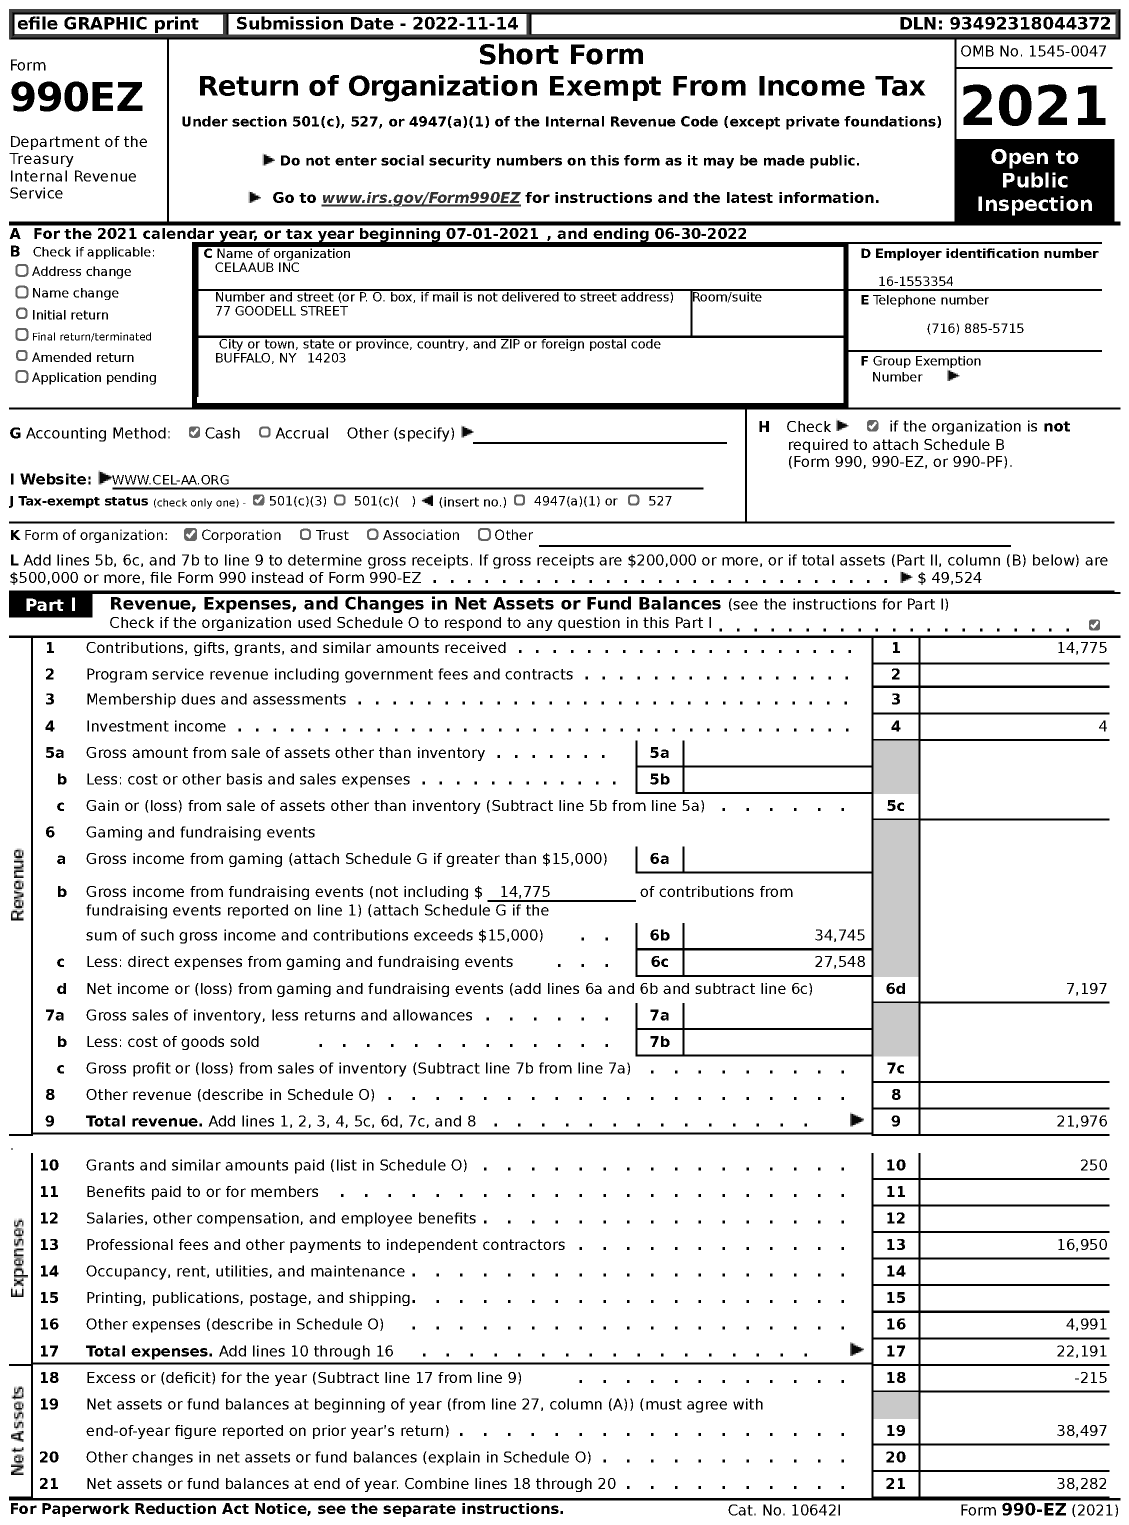 Image of first page of 2021 Form 990EZ for Celaaub